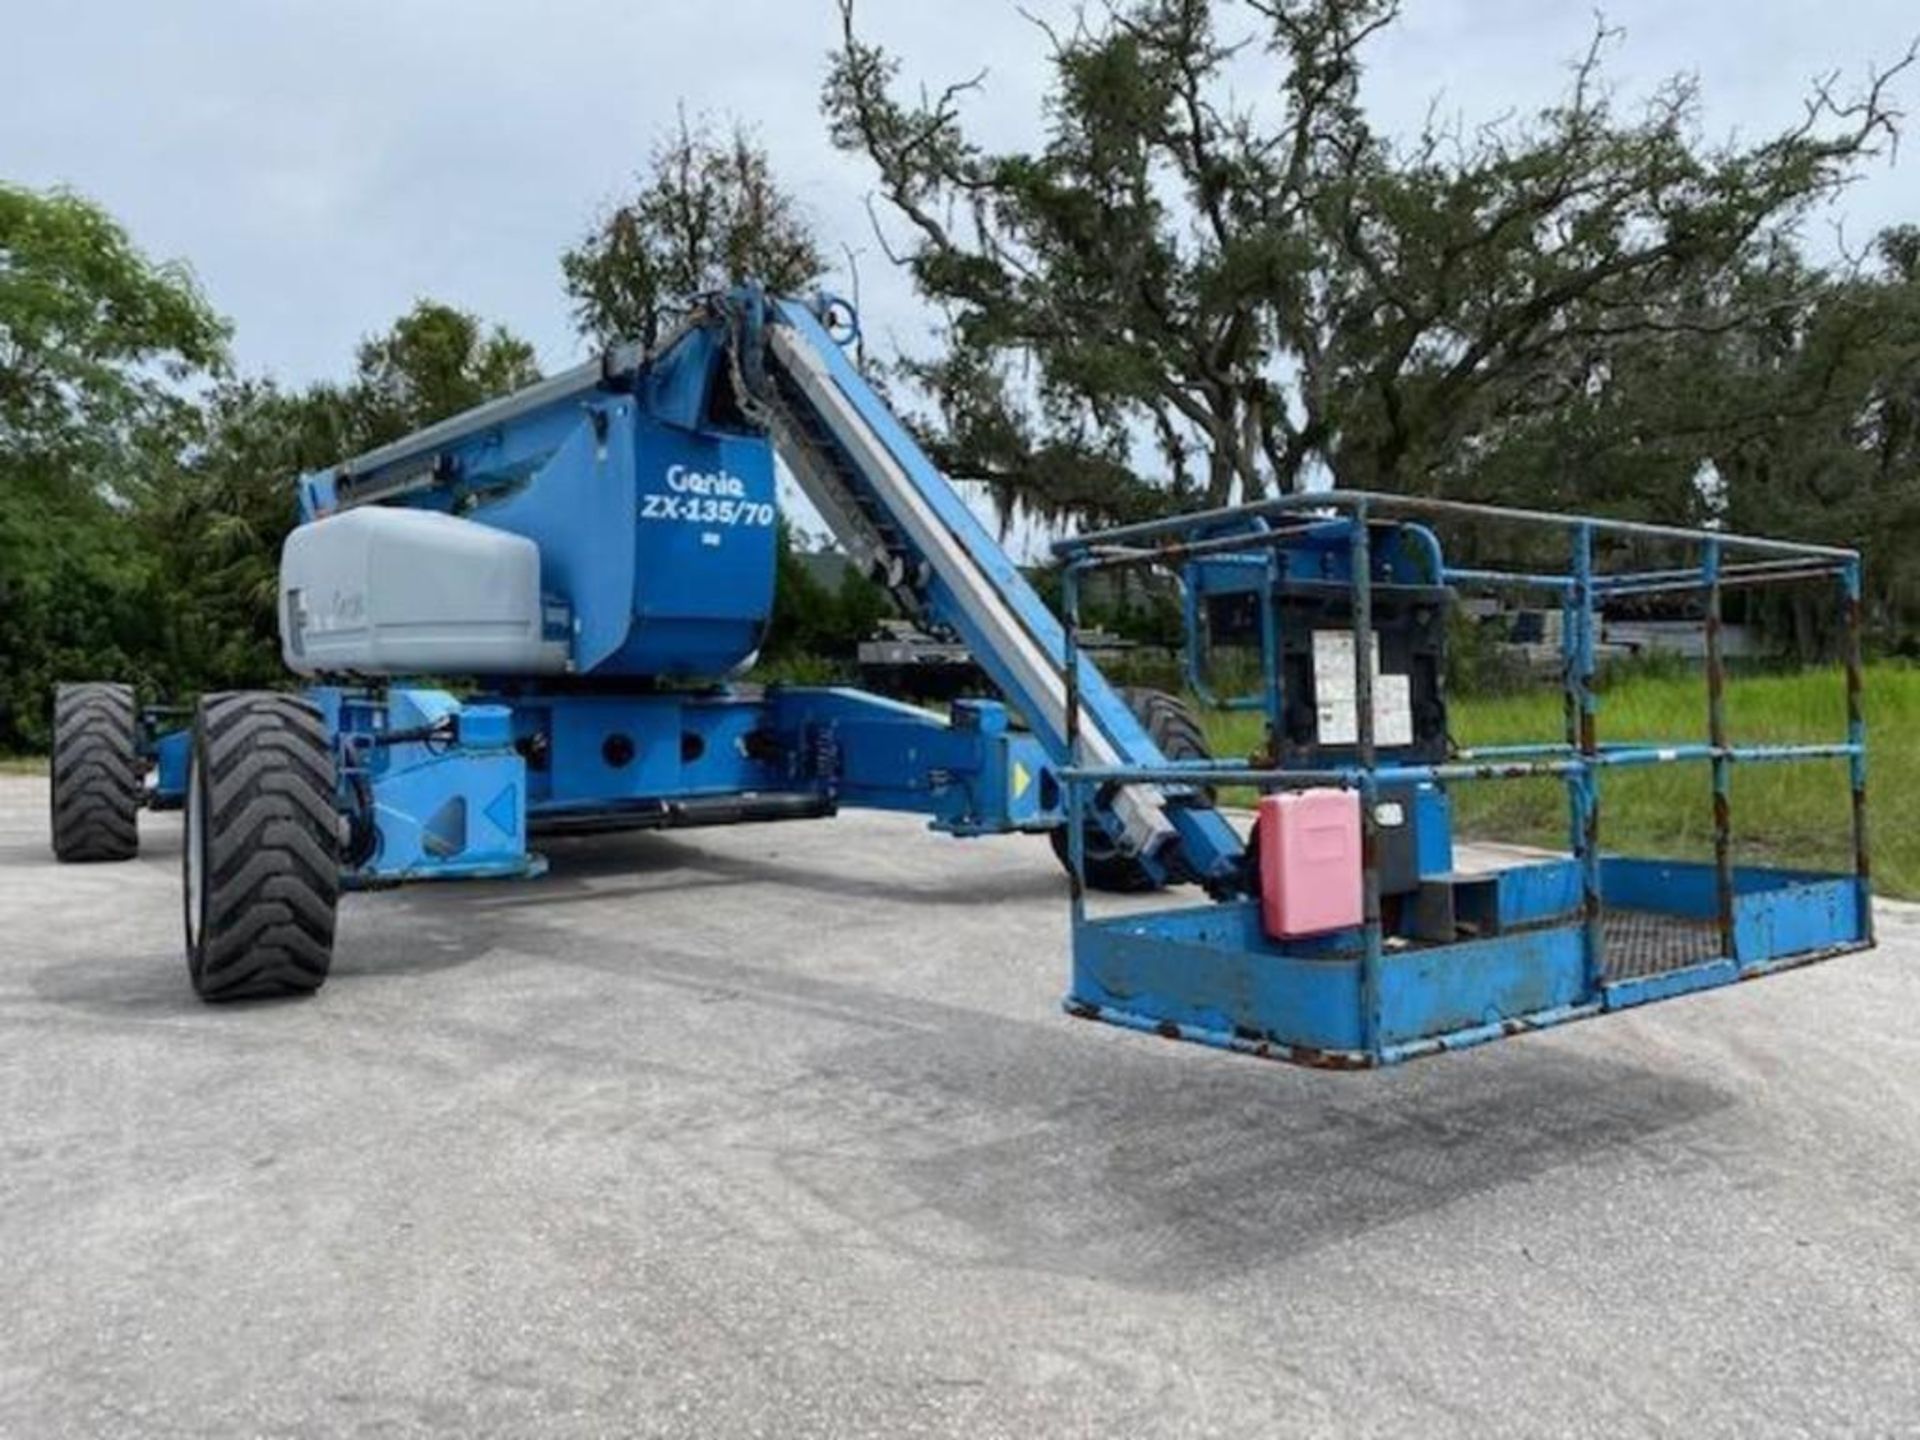 2013 GENIE ZX 135/70 DIESEL ARTICULATING BOOM LIFT, CRAB STEERING AND EXTENDABLE LEGS - Image 5 of 38